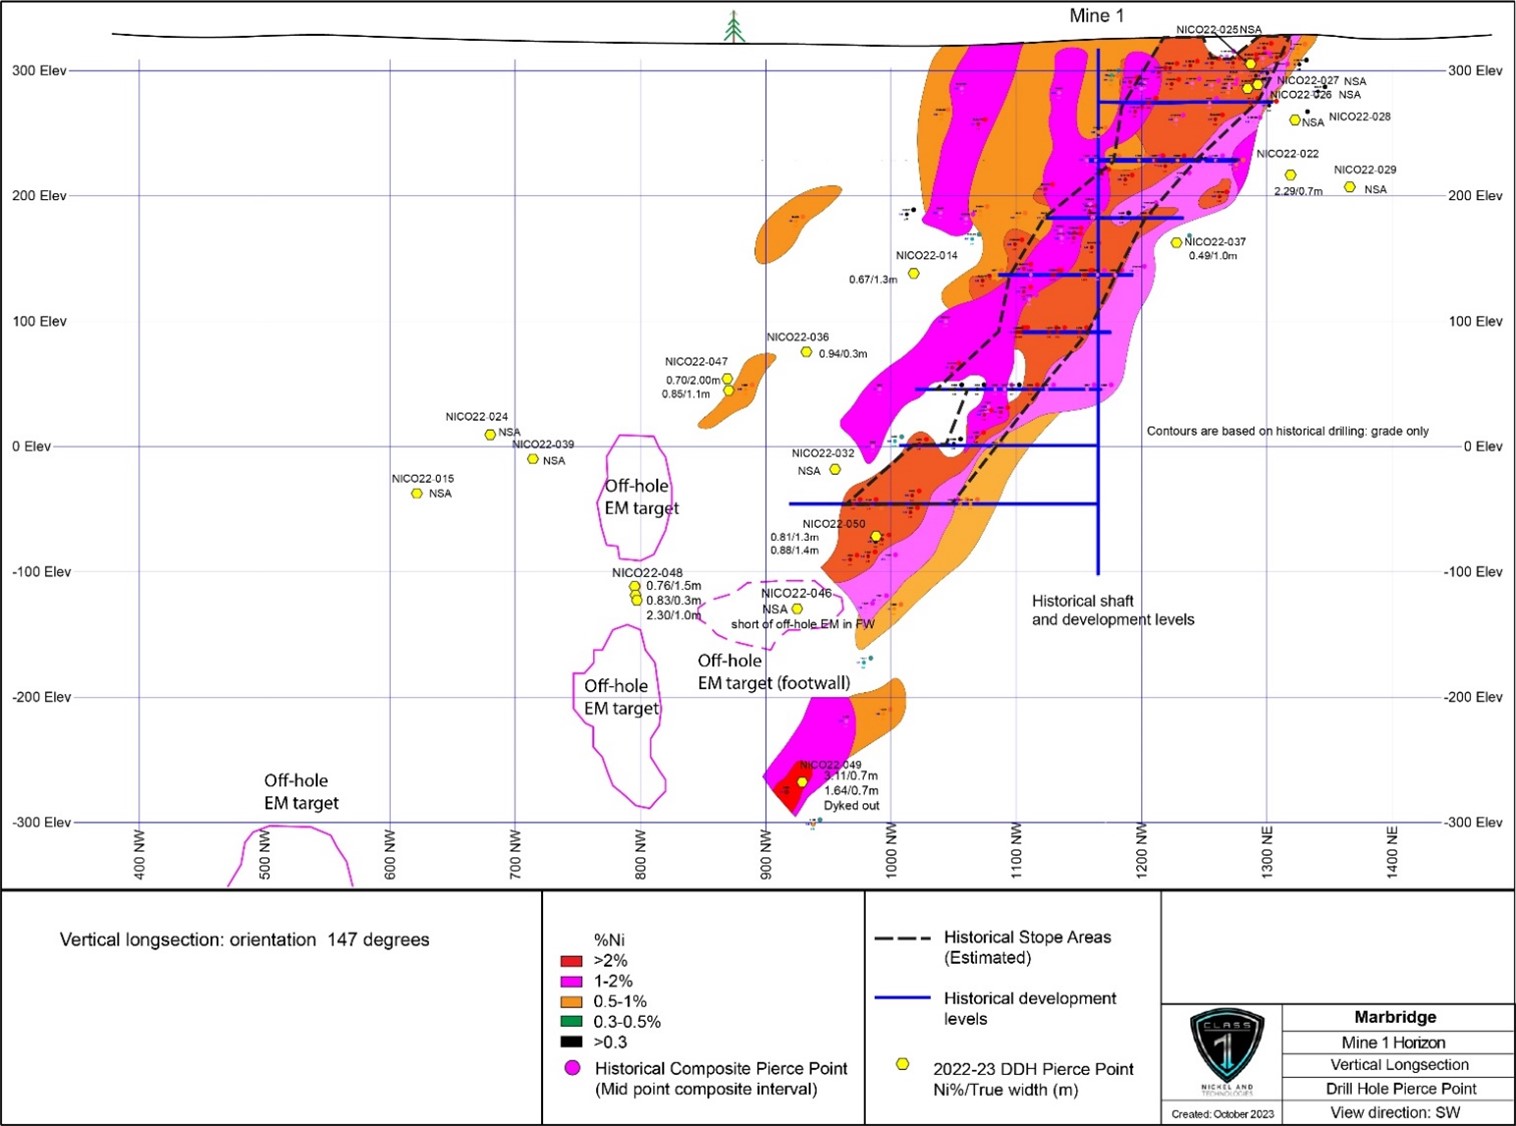 Vertical long-section of the Mine 1 Horizon (147Az - looking southwest) with 2022 drill hole pierce points (Ni%/true width) and the location of the 4 untested off-hole BHEM targets (“Off-hole EM target”), within the area of the historical Marbridge Ni-Cu Mine (NSA = no significant assays).